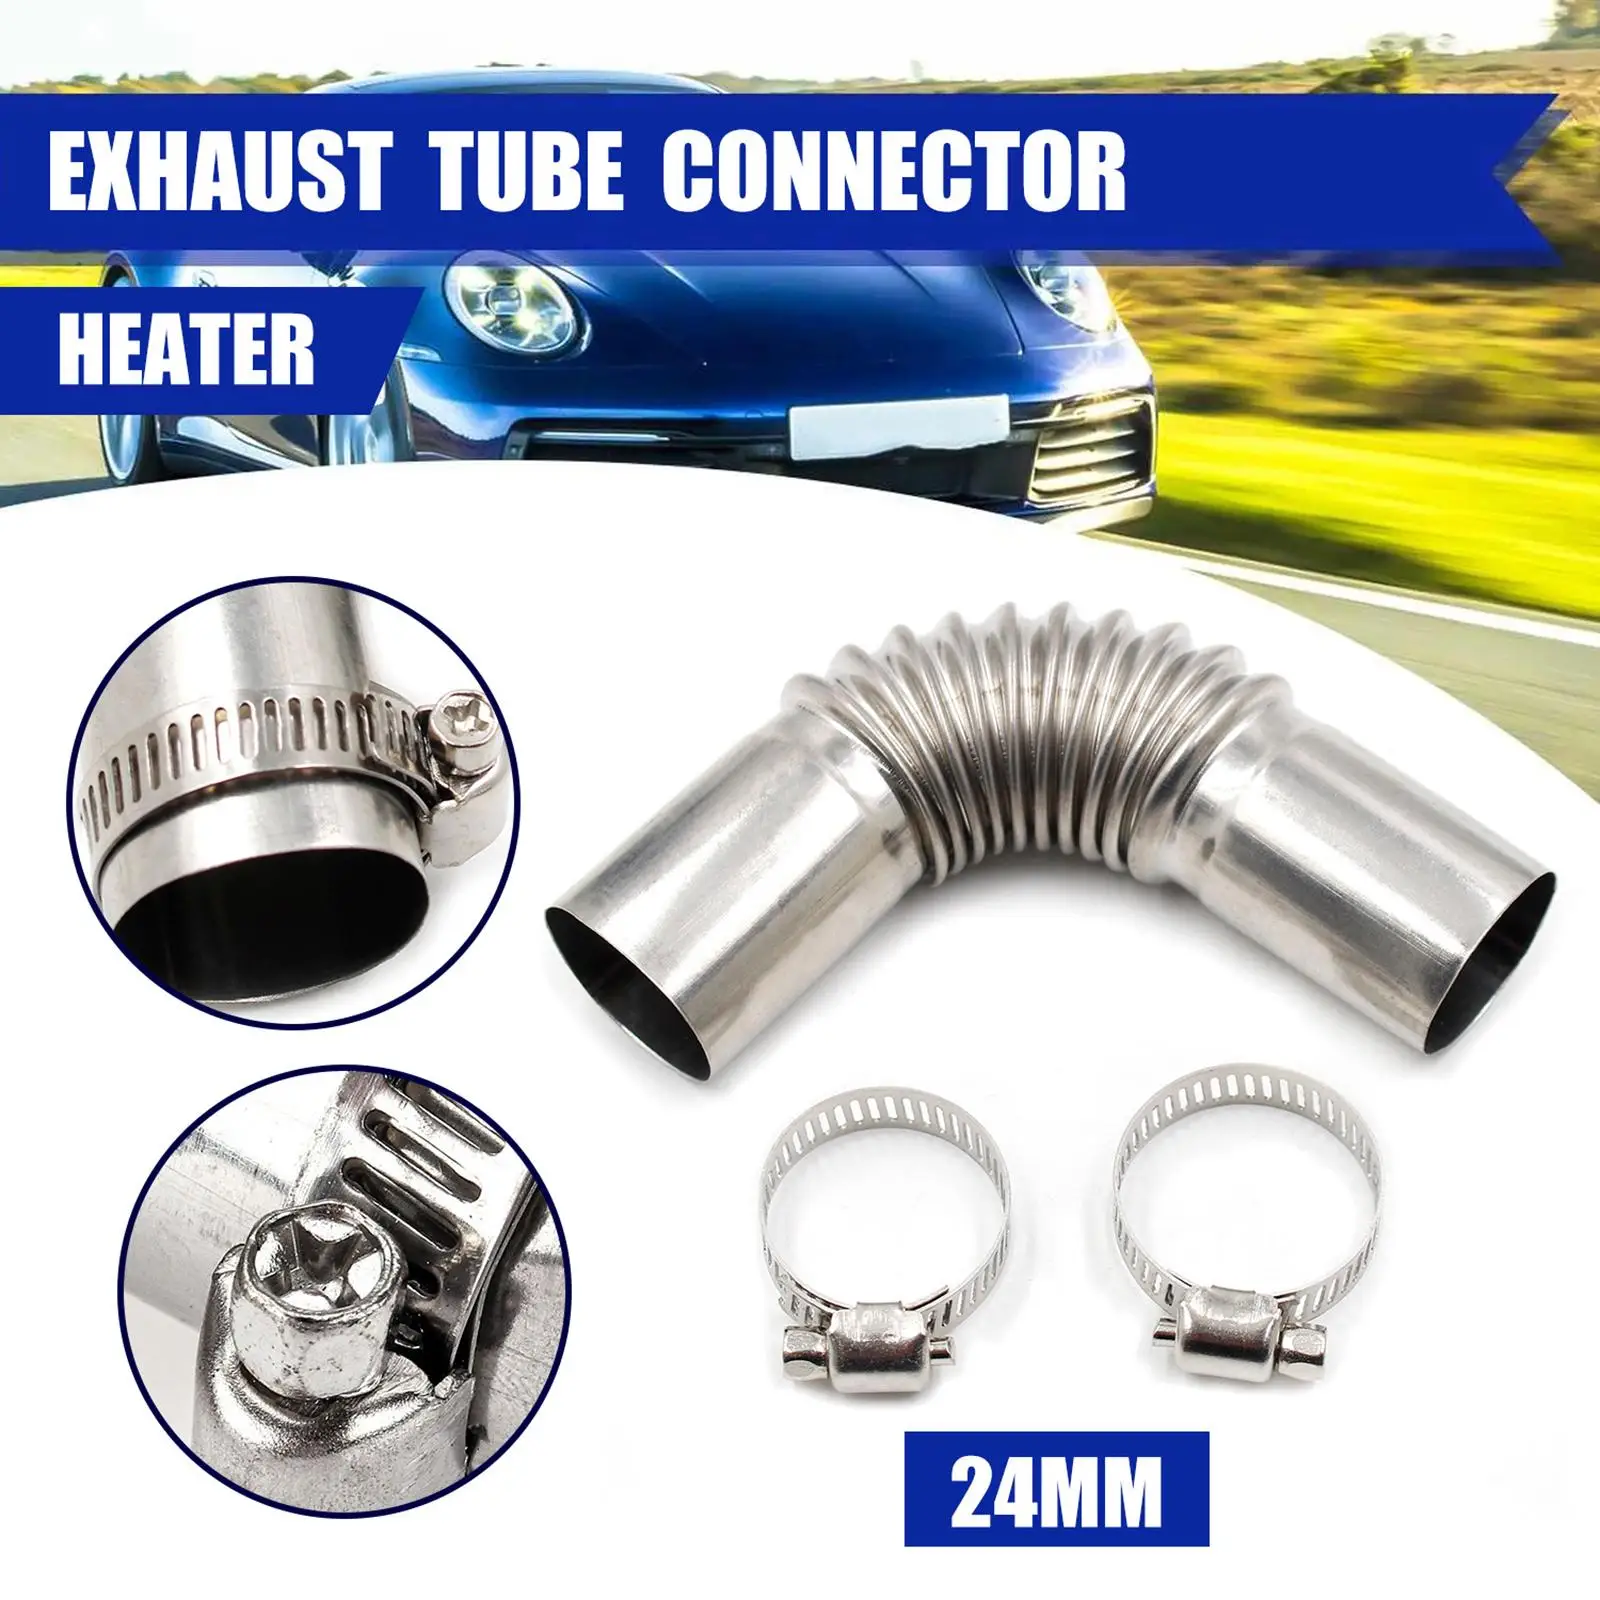 24mm Exhaust Pipe Tube Elbow Connector 25mm ID Stainless Steel Air Exhaust Pipes Connector for Heater W/ Clamps